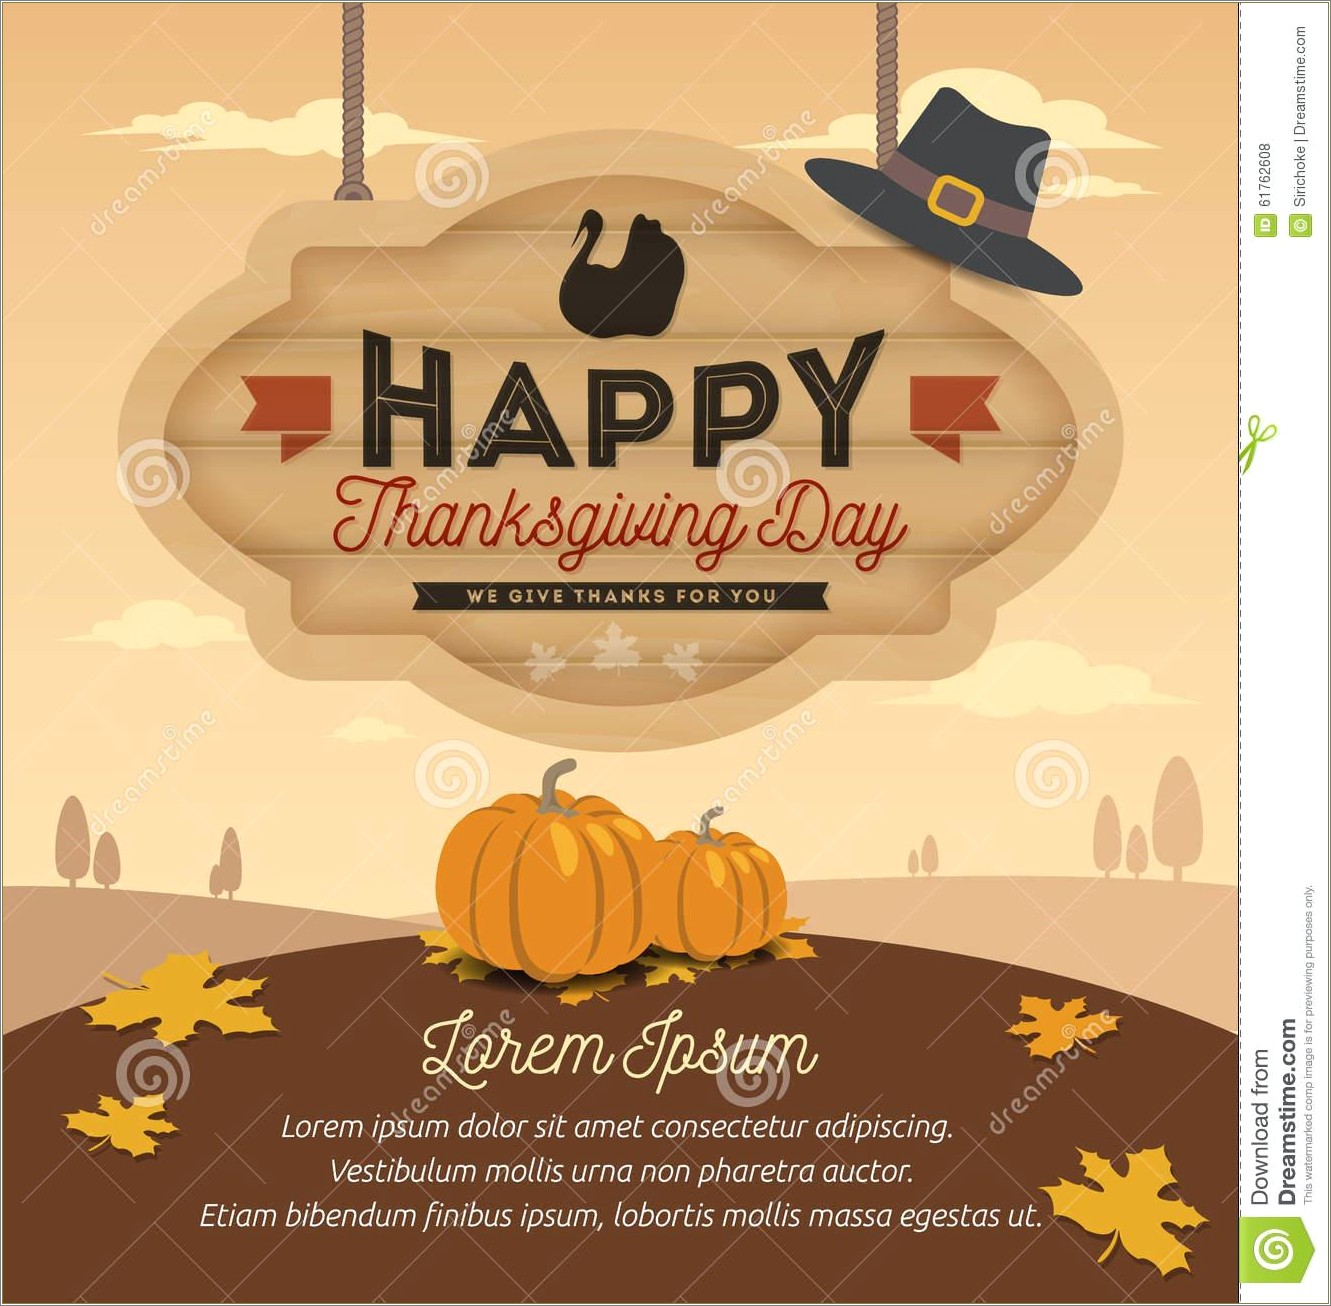 Free Downloadable Happy Thanksgiving Templates For Word